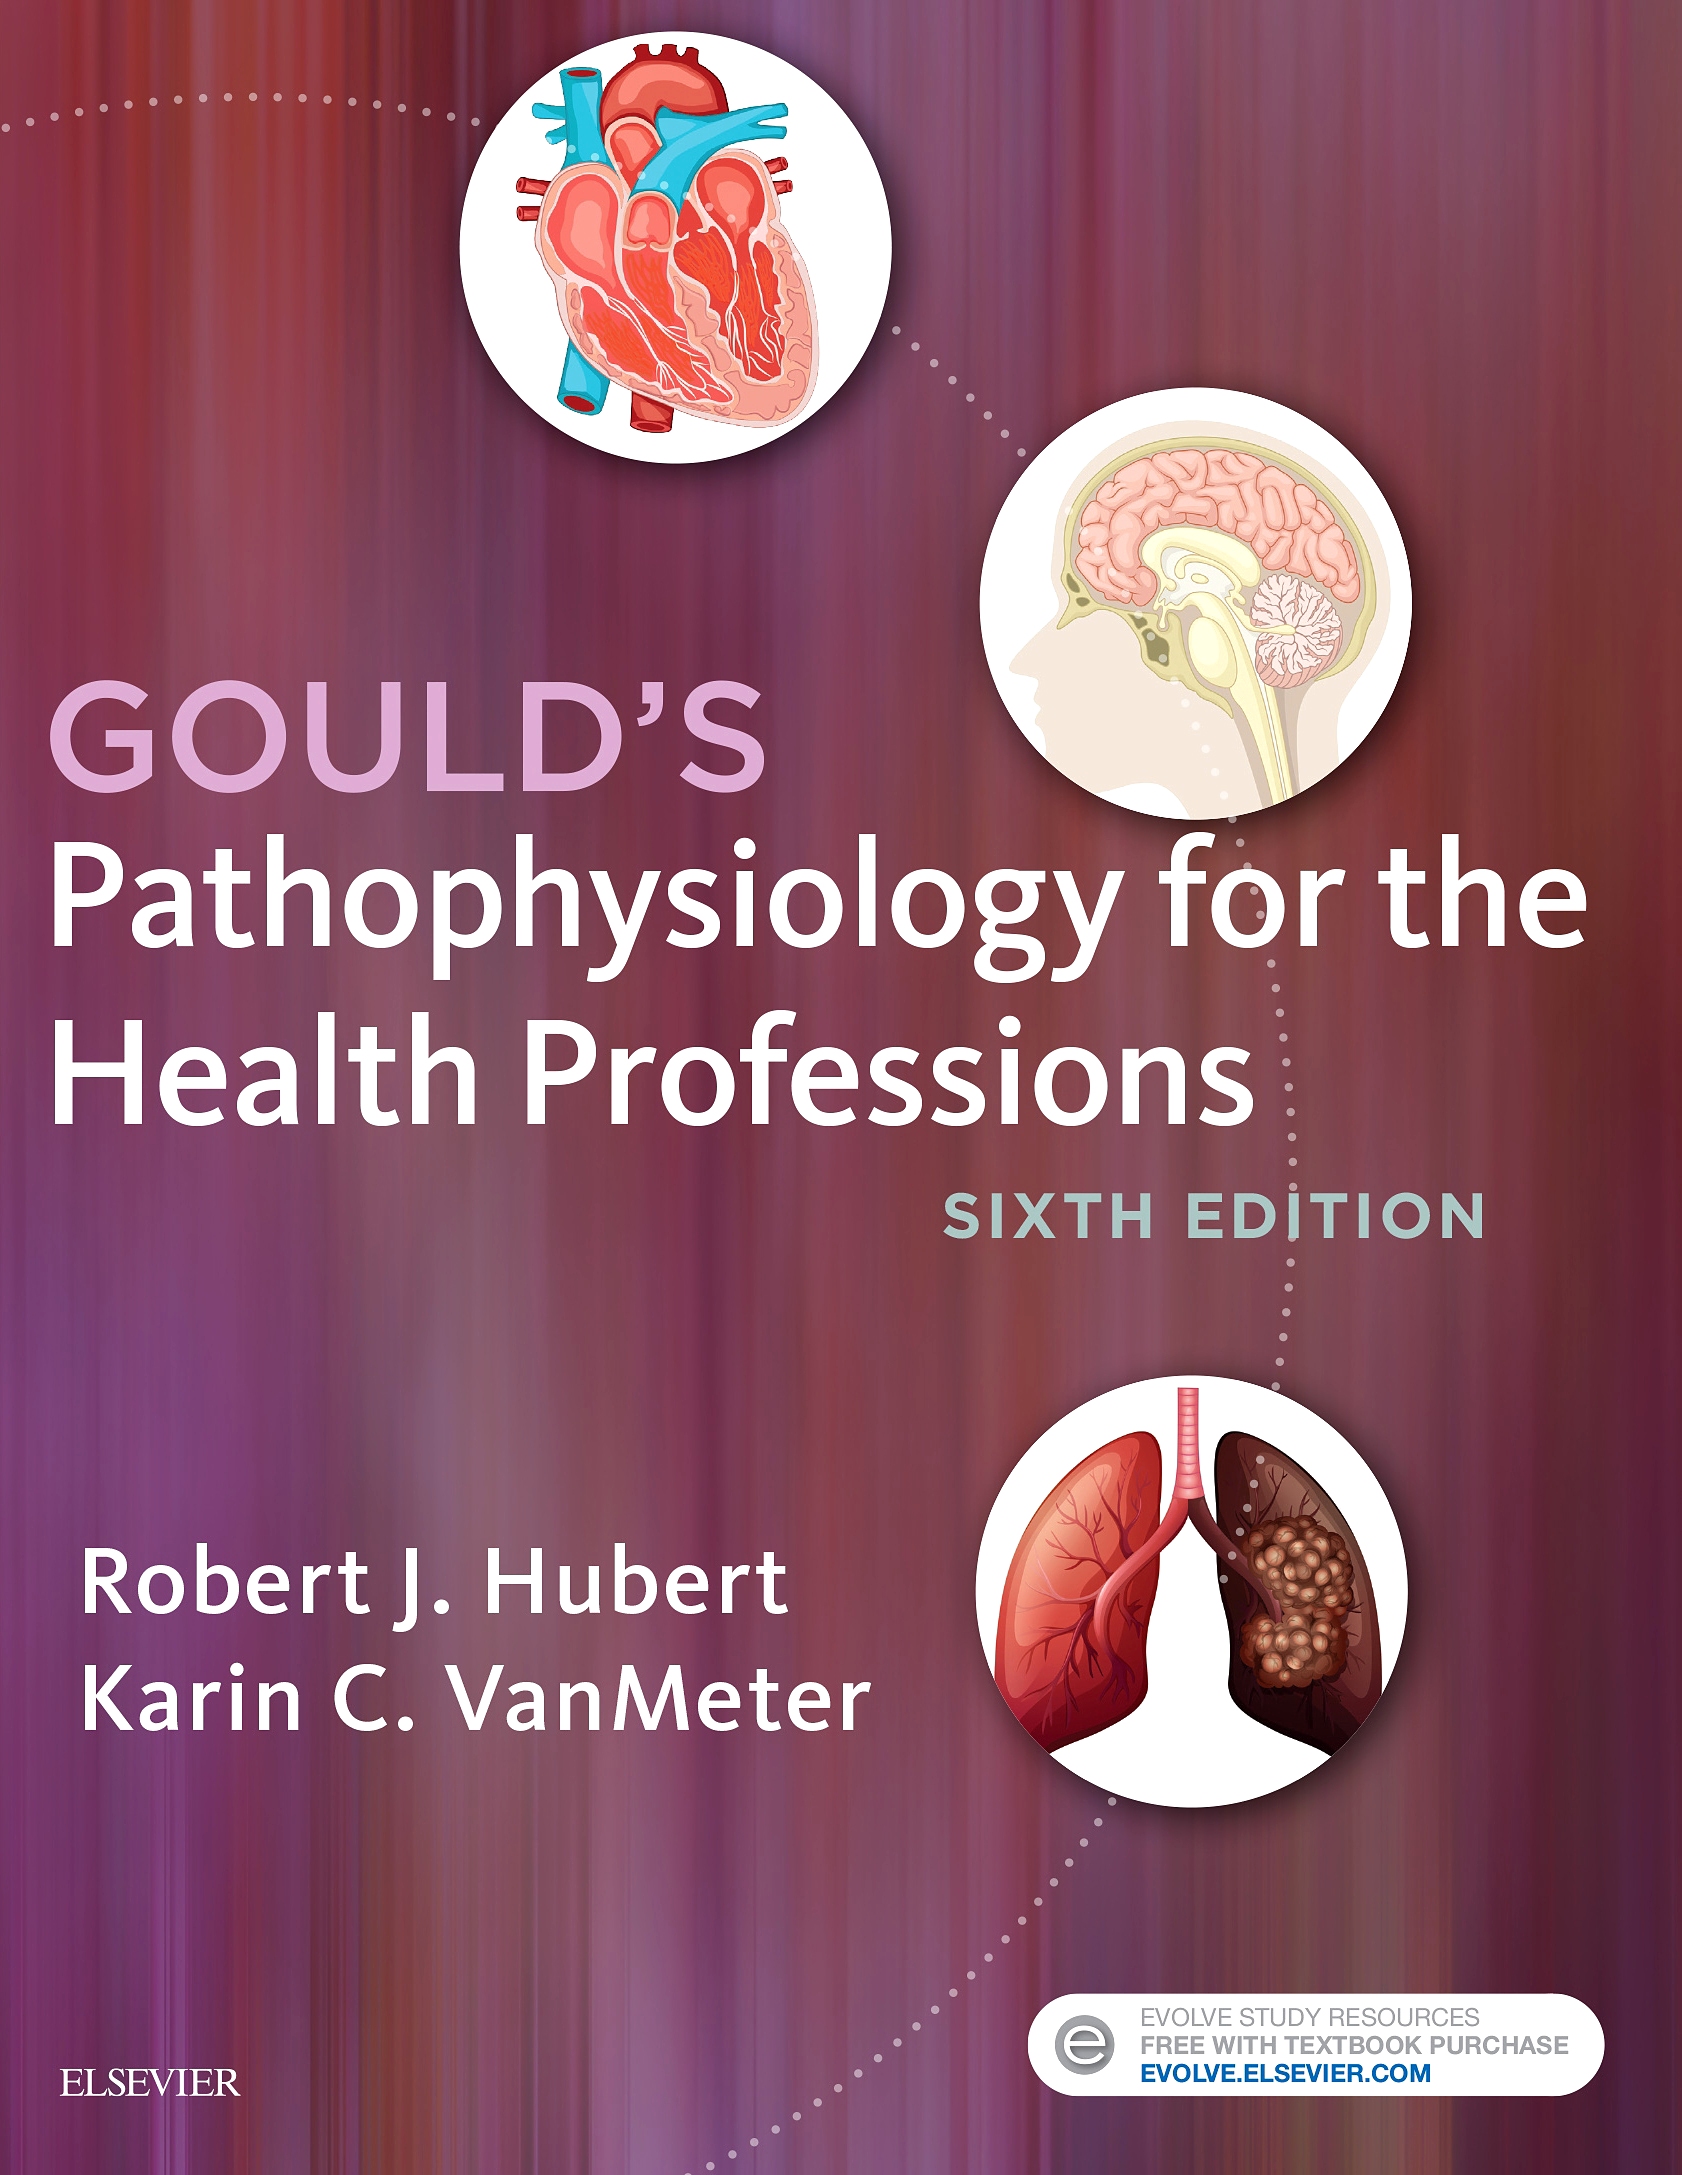 Pathophysiology Online for Gould's Pathophysiology for the Health Professions, 6th Edition